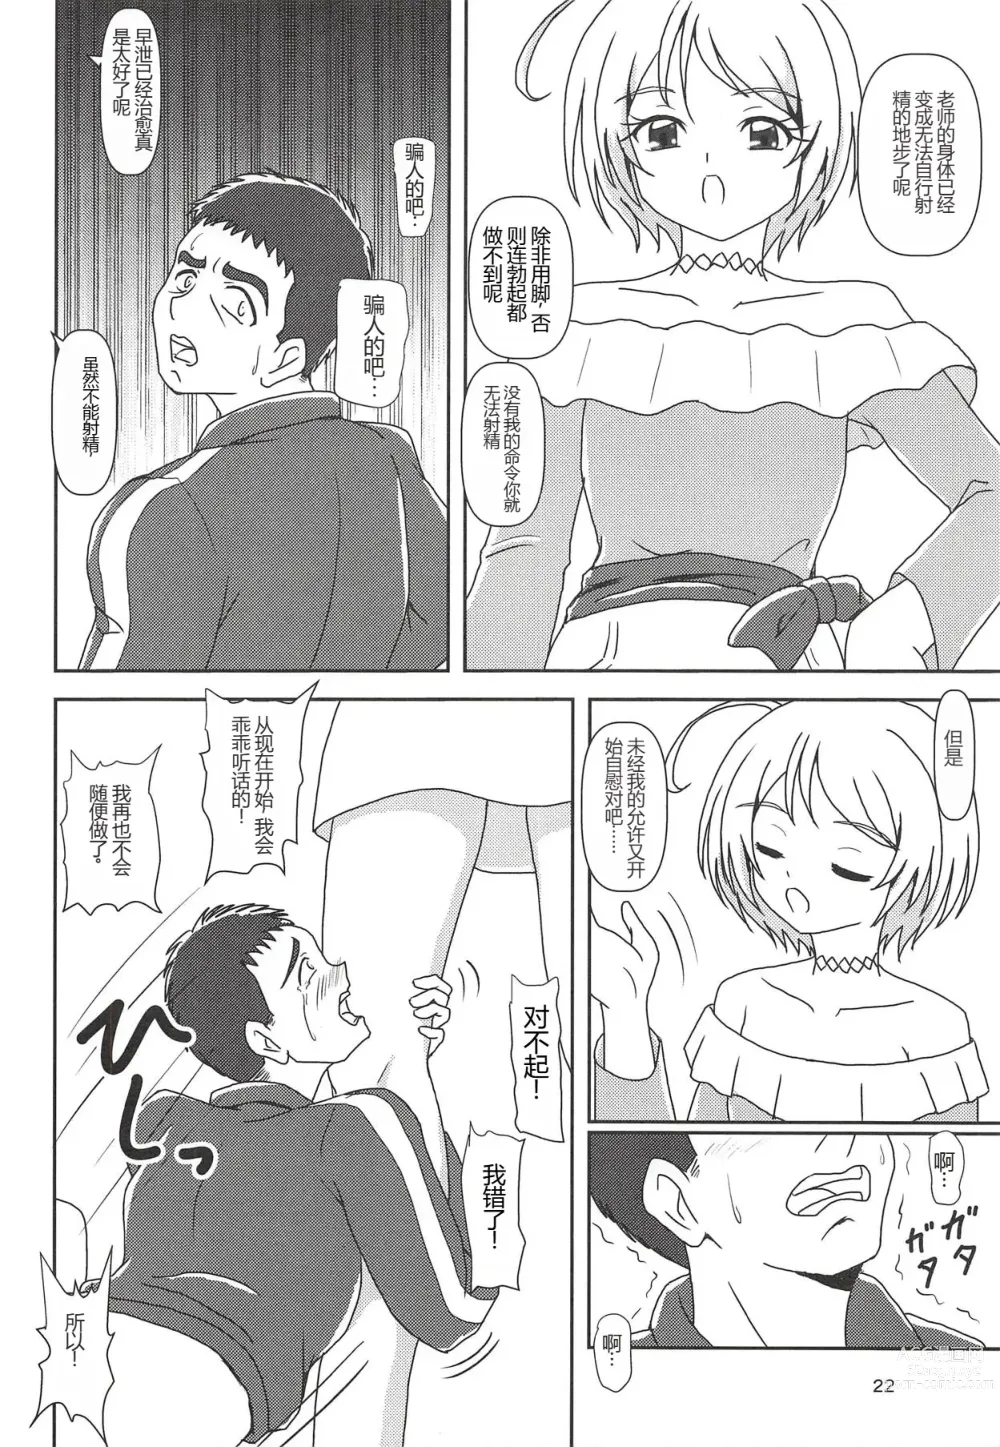 Page 21 of doujinshi Hugtto! Zuricure